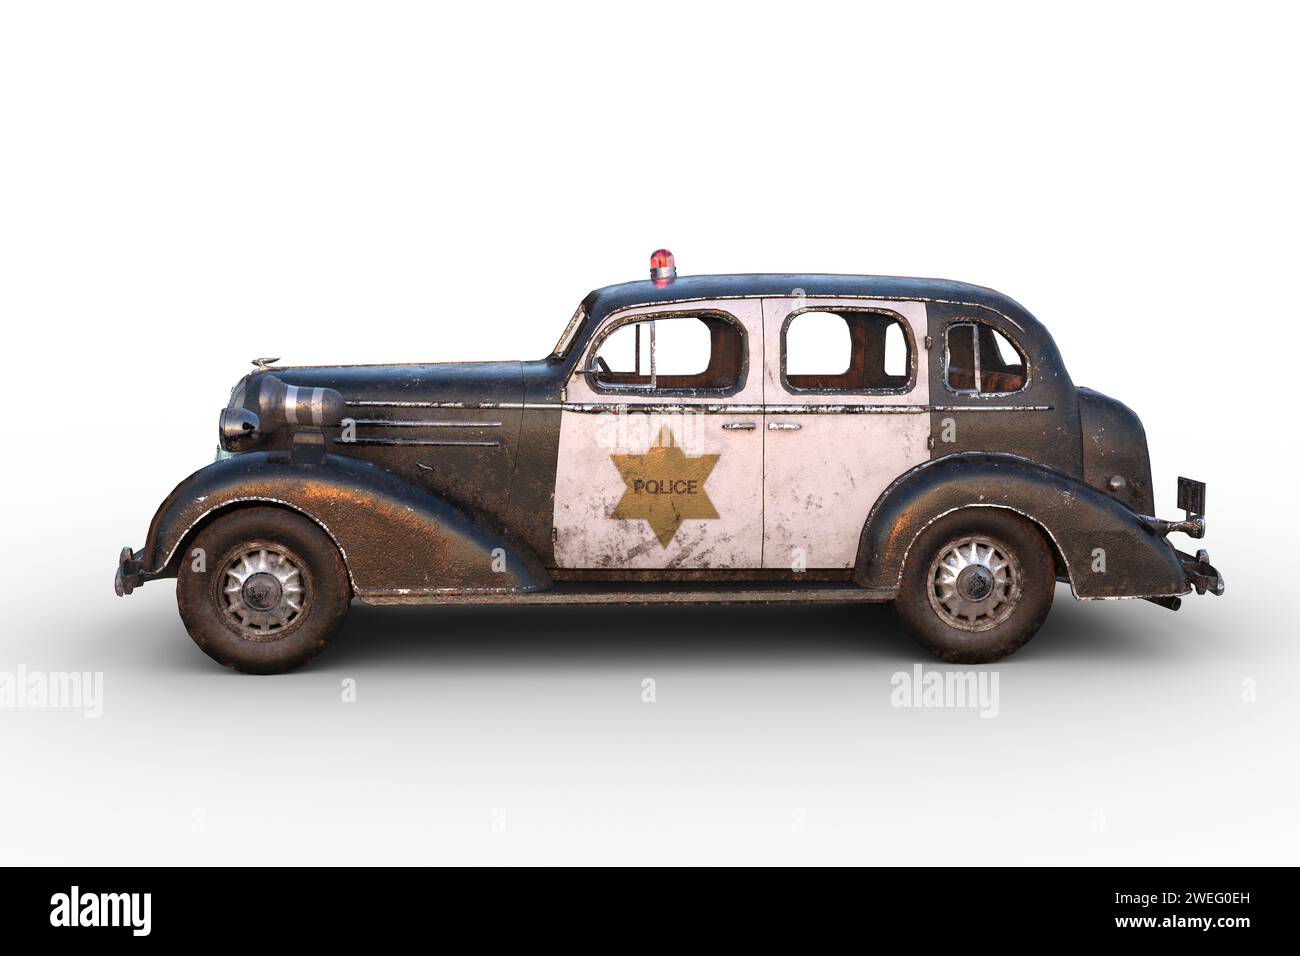 Side view of a rusty dirty old vintage black and white police car. 3D illustration isolated on a white background. Stock Photo